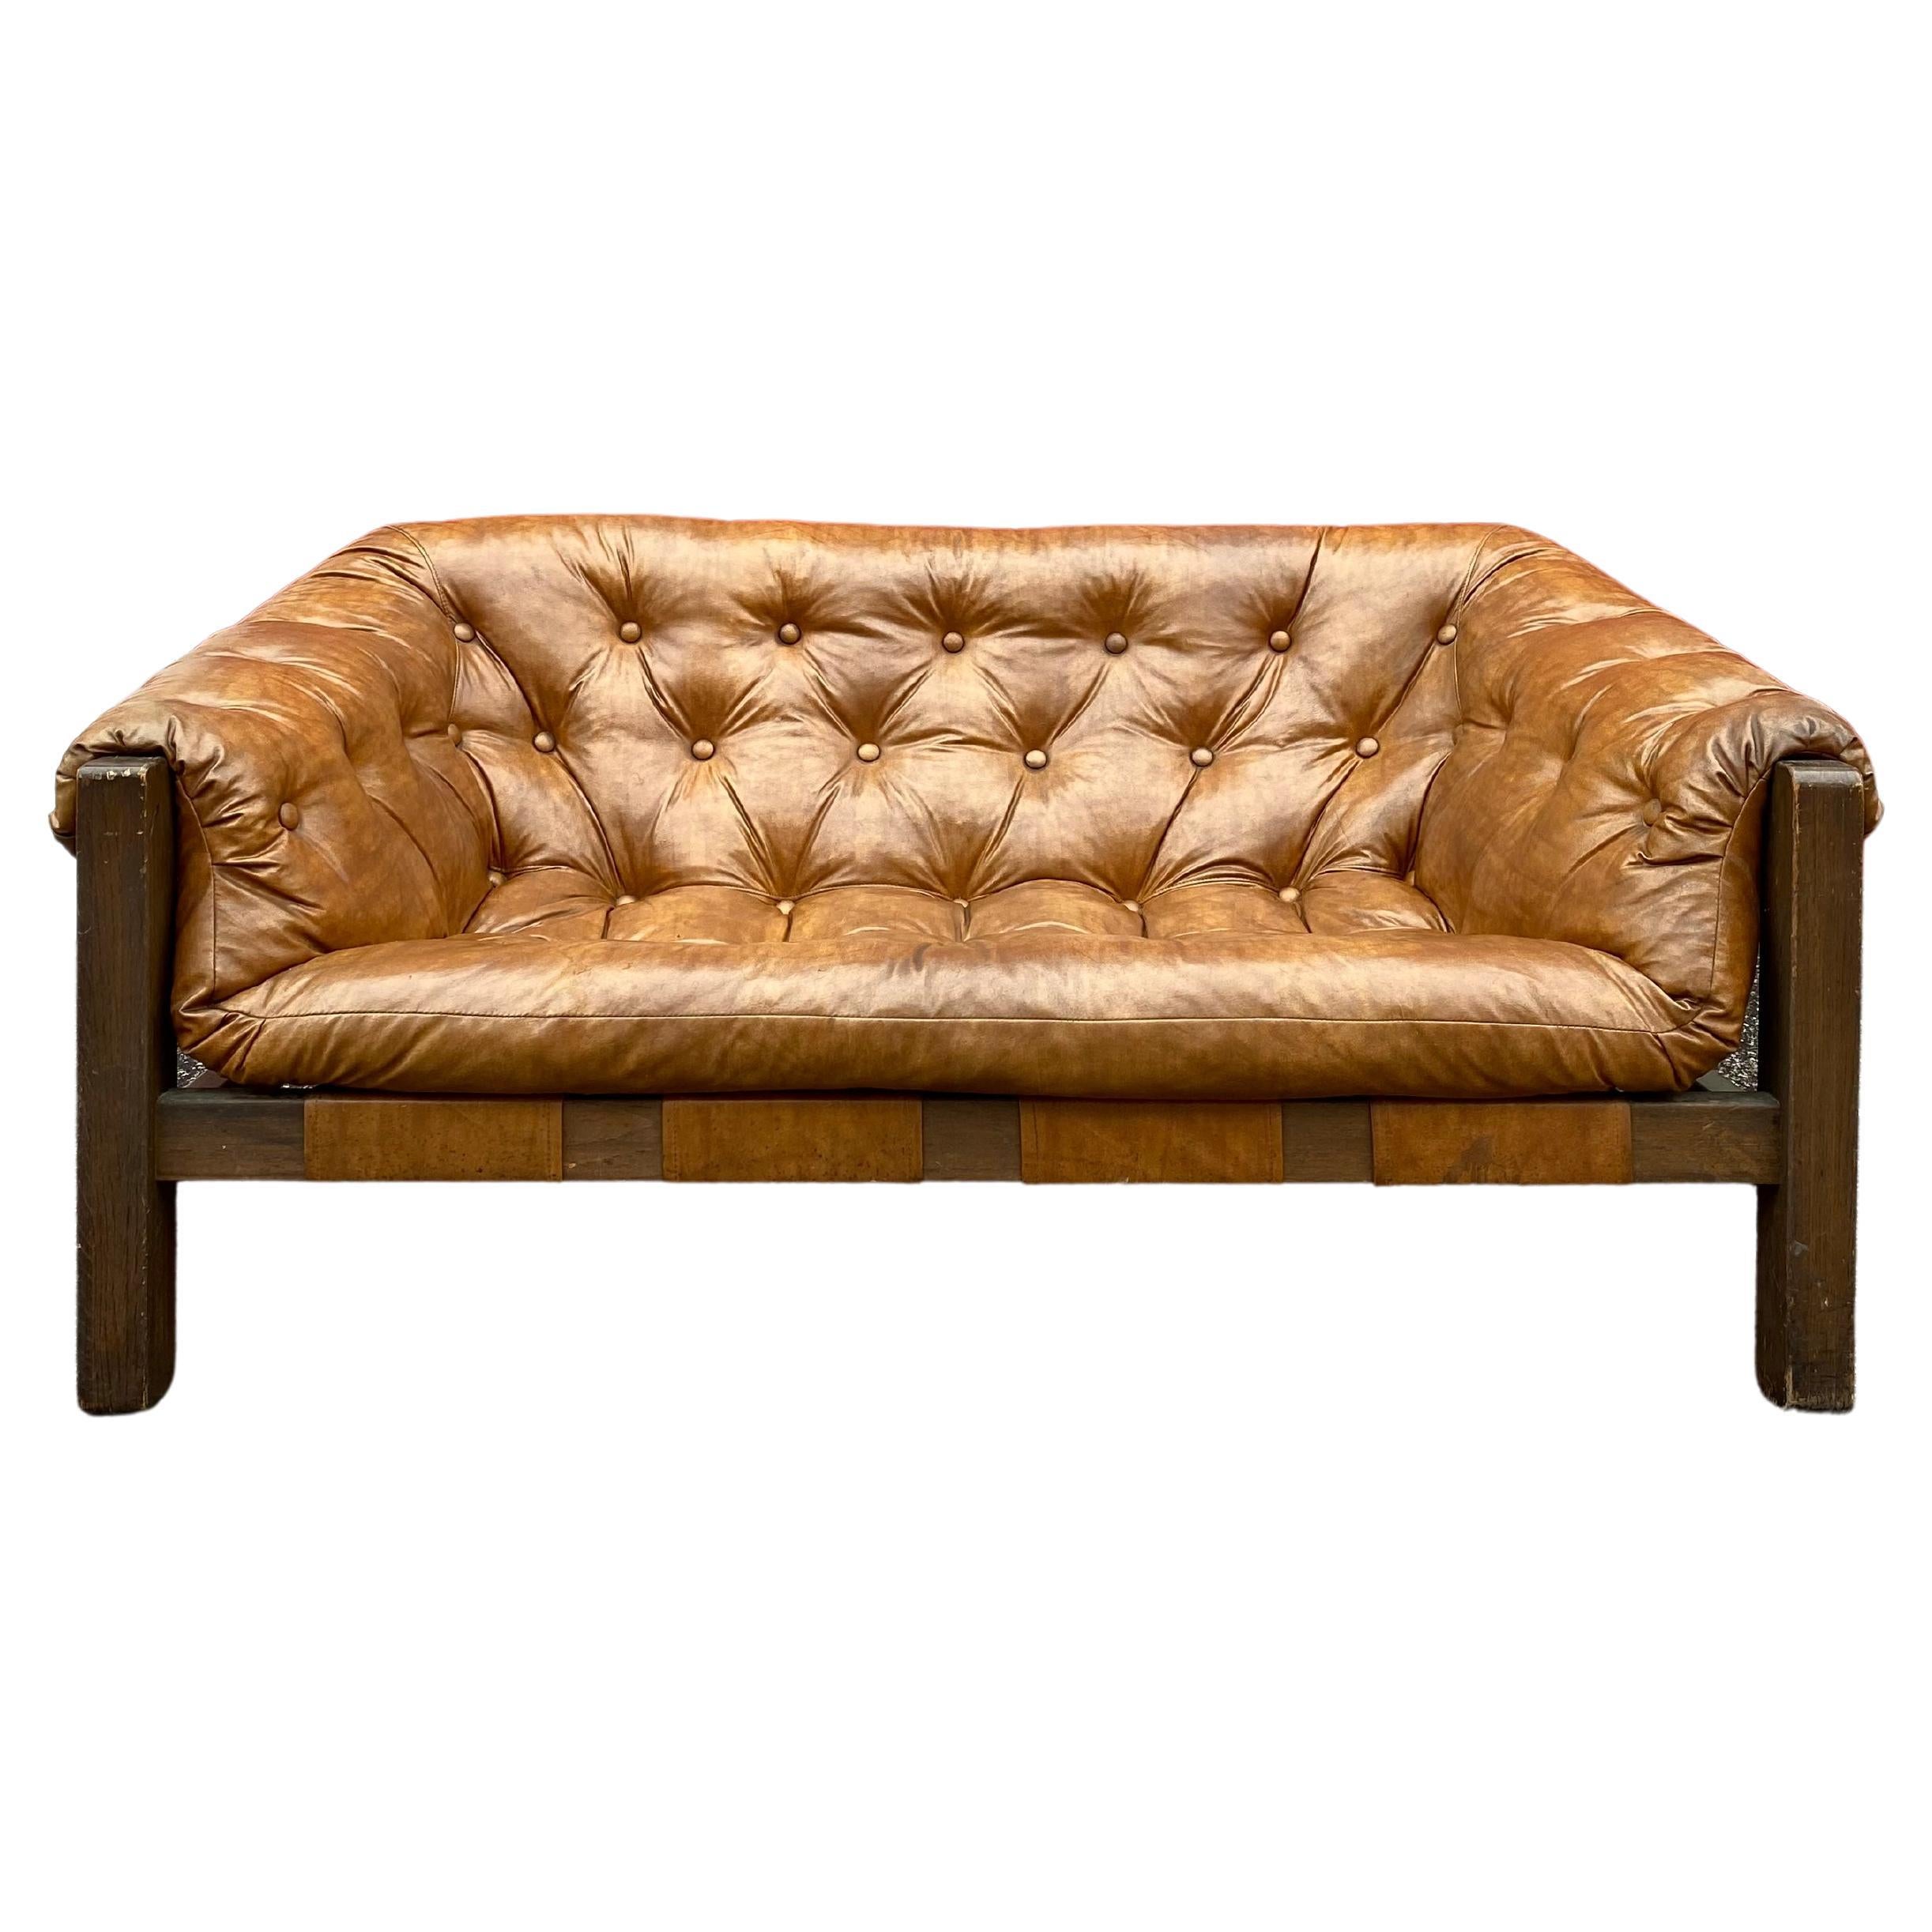 1960s Mid-Century Modern Attributed to Jean Gillon Tufted Sling Sofa